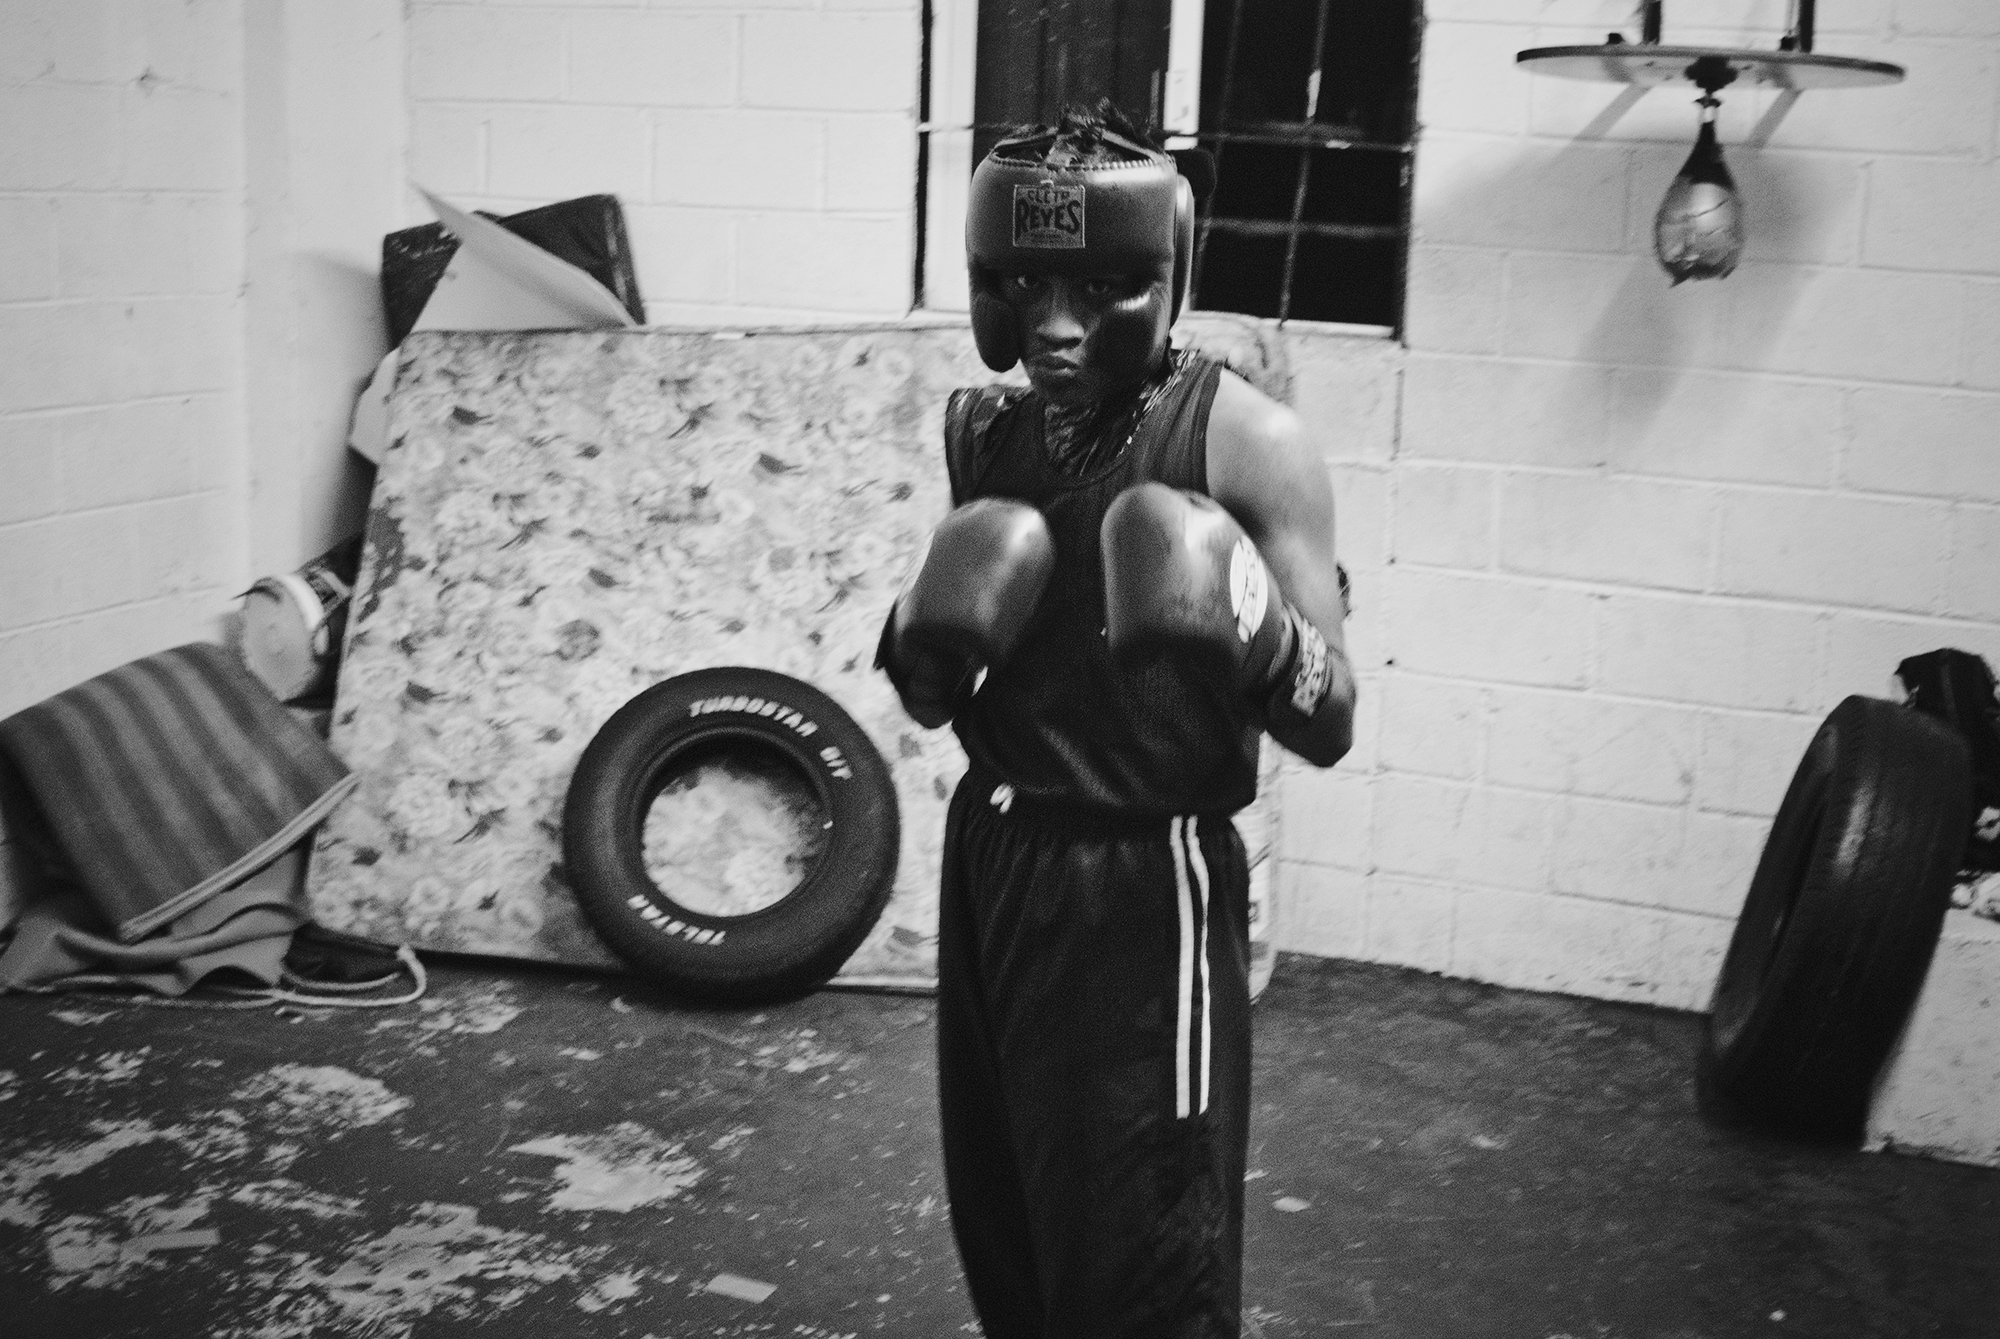  Young amateur boxer gives the stance in coach Cervantes’s boxing gym. 